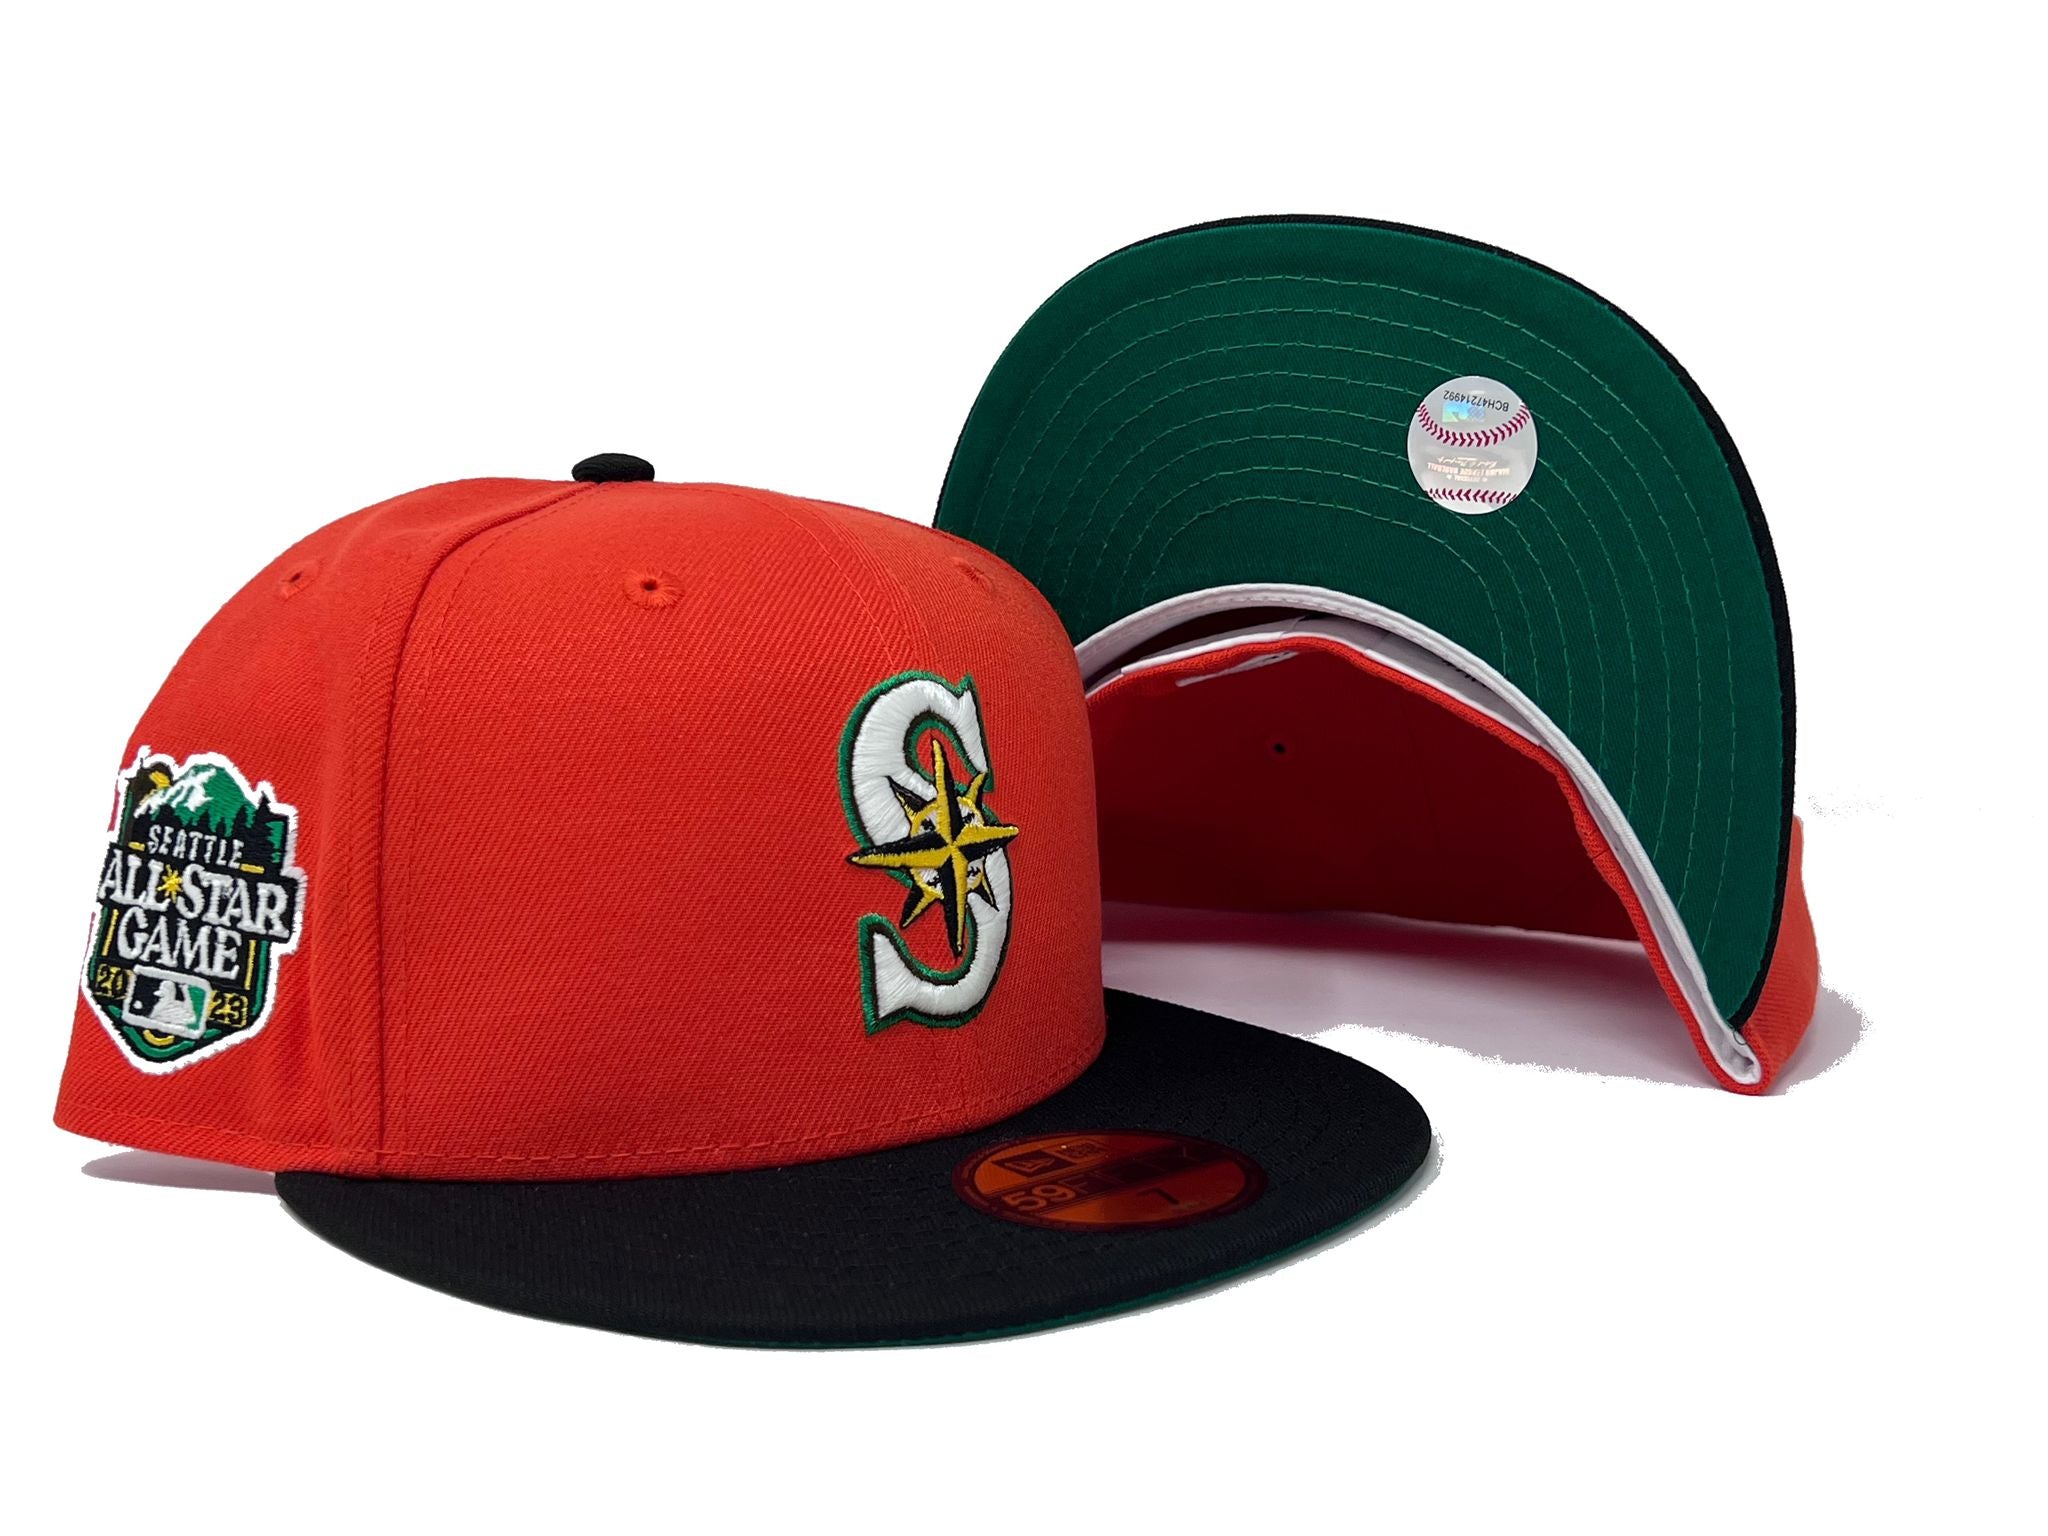 Official MLB Merchandise All Star Game Hats, MLB All Star Game